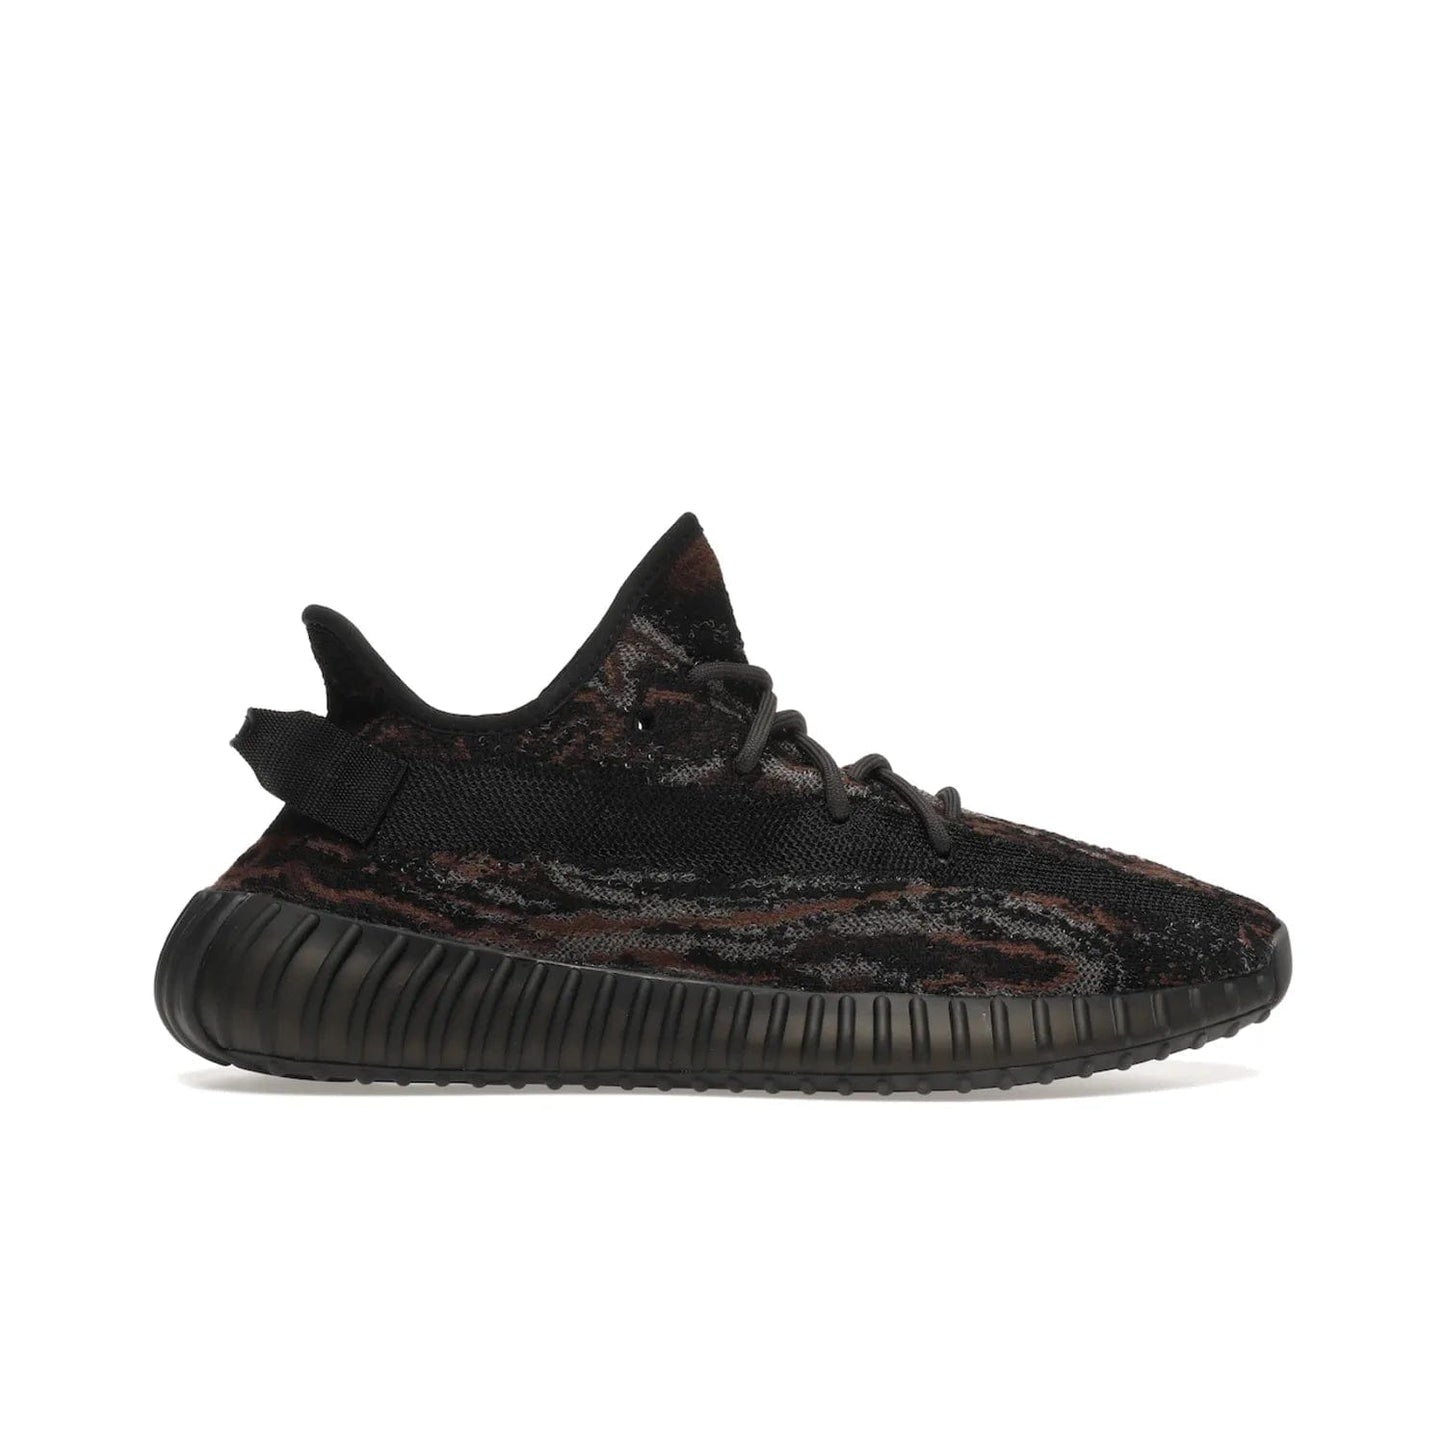 adidas Yeezy Boost 350 V2 MX Rock - Image 1 - Only at www.BallersClubKickz.com - The adidas Yeezy Boost 350 V2 MX Rock features a stylish marbled upper of black, grey, and brown tones. Shop the signature Boost sole, heel tab, and mesh side stripe now, available December of 2021.